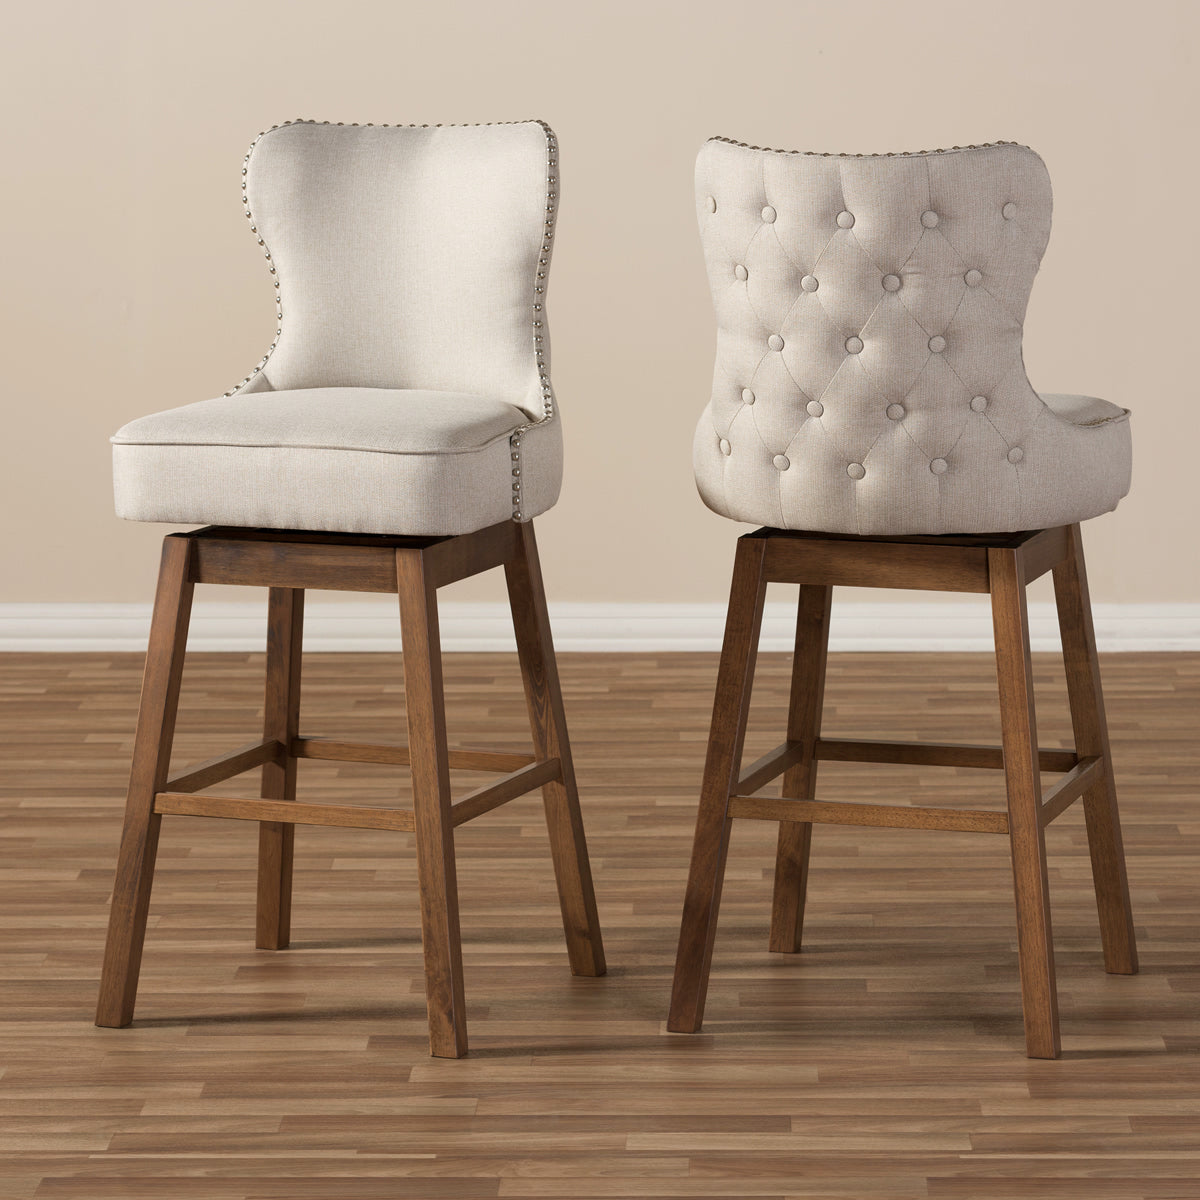 Baxton Studio Gradisca Modern and Contemporary Brown Wood Finishing and Light Beige Fabric Button-Tufted Upholstered Swivel Barstool Baxton Studio-Bar Stools-Minimal And Modern - 8